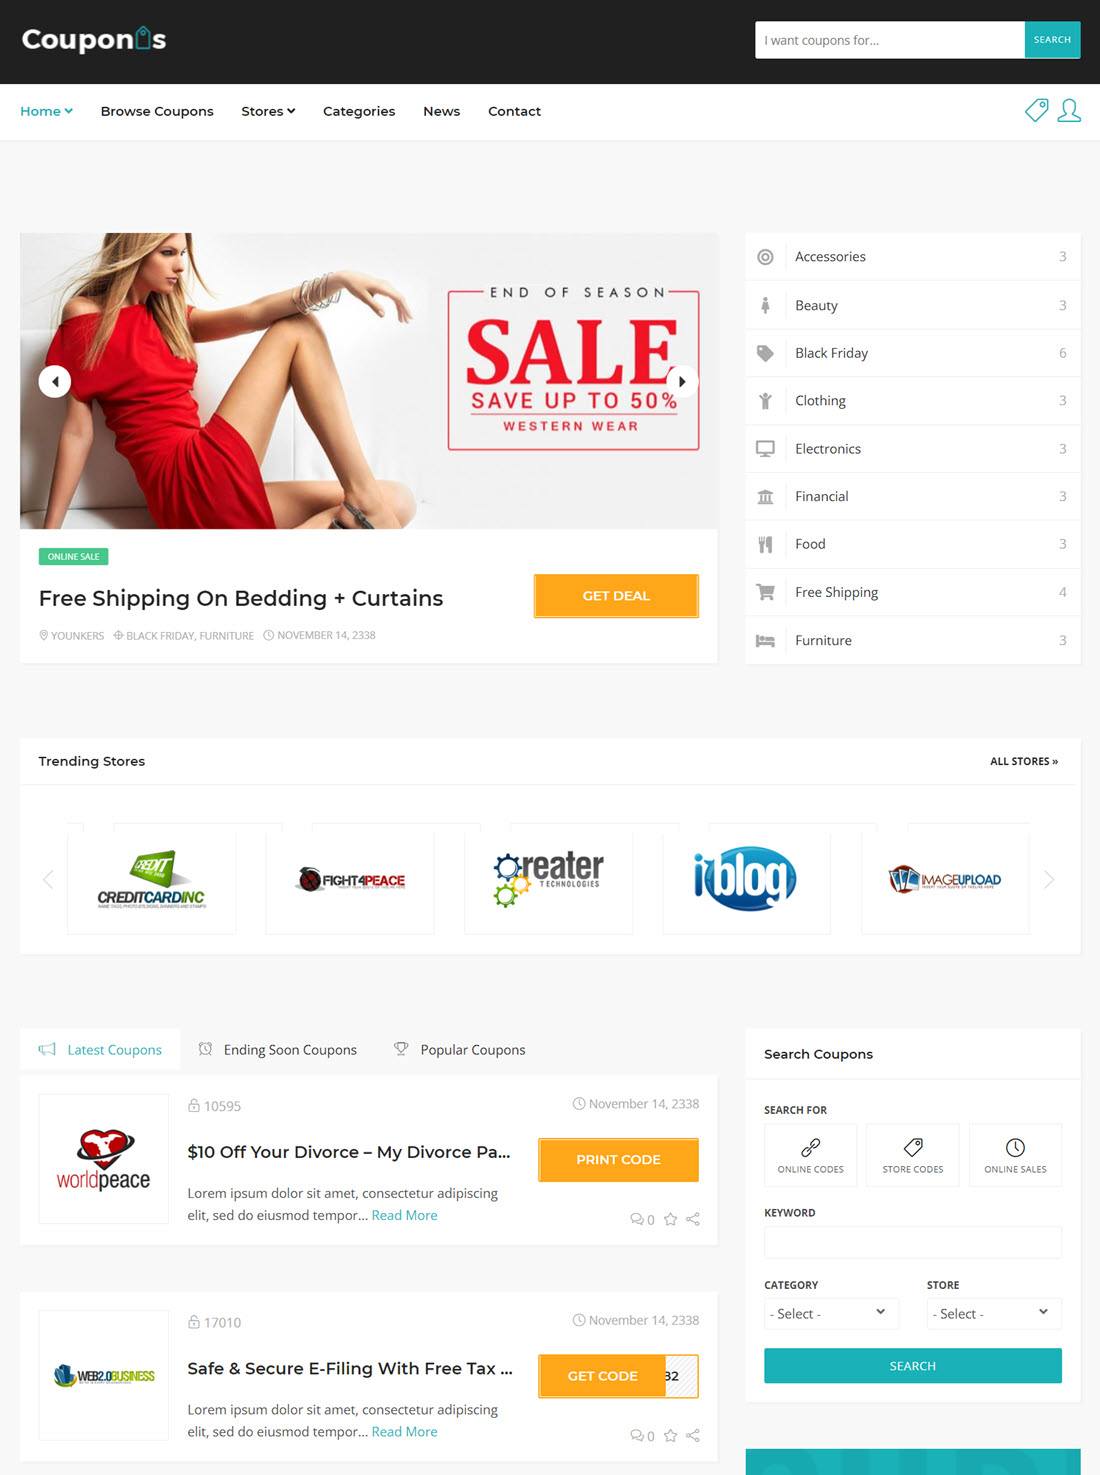 Couponis Affiliate & Submitting Coupons WordPress Theme Demo